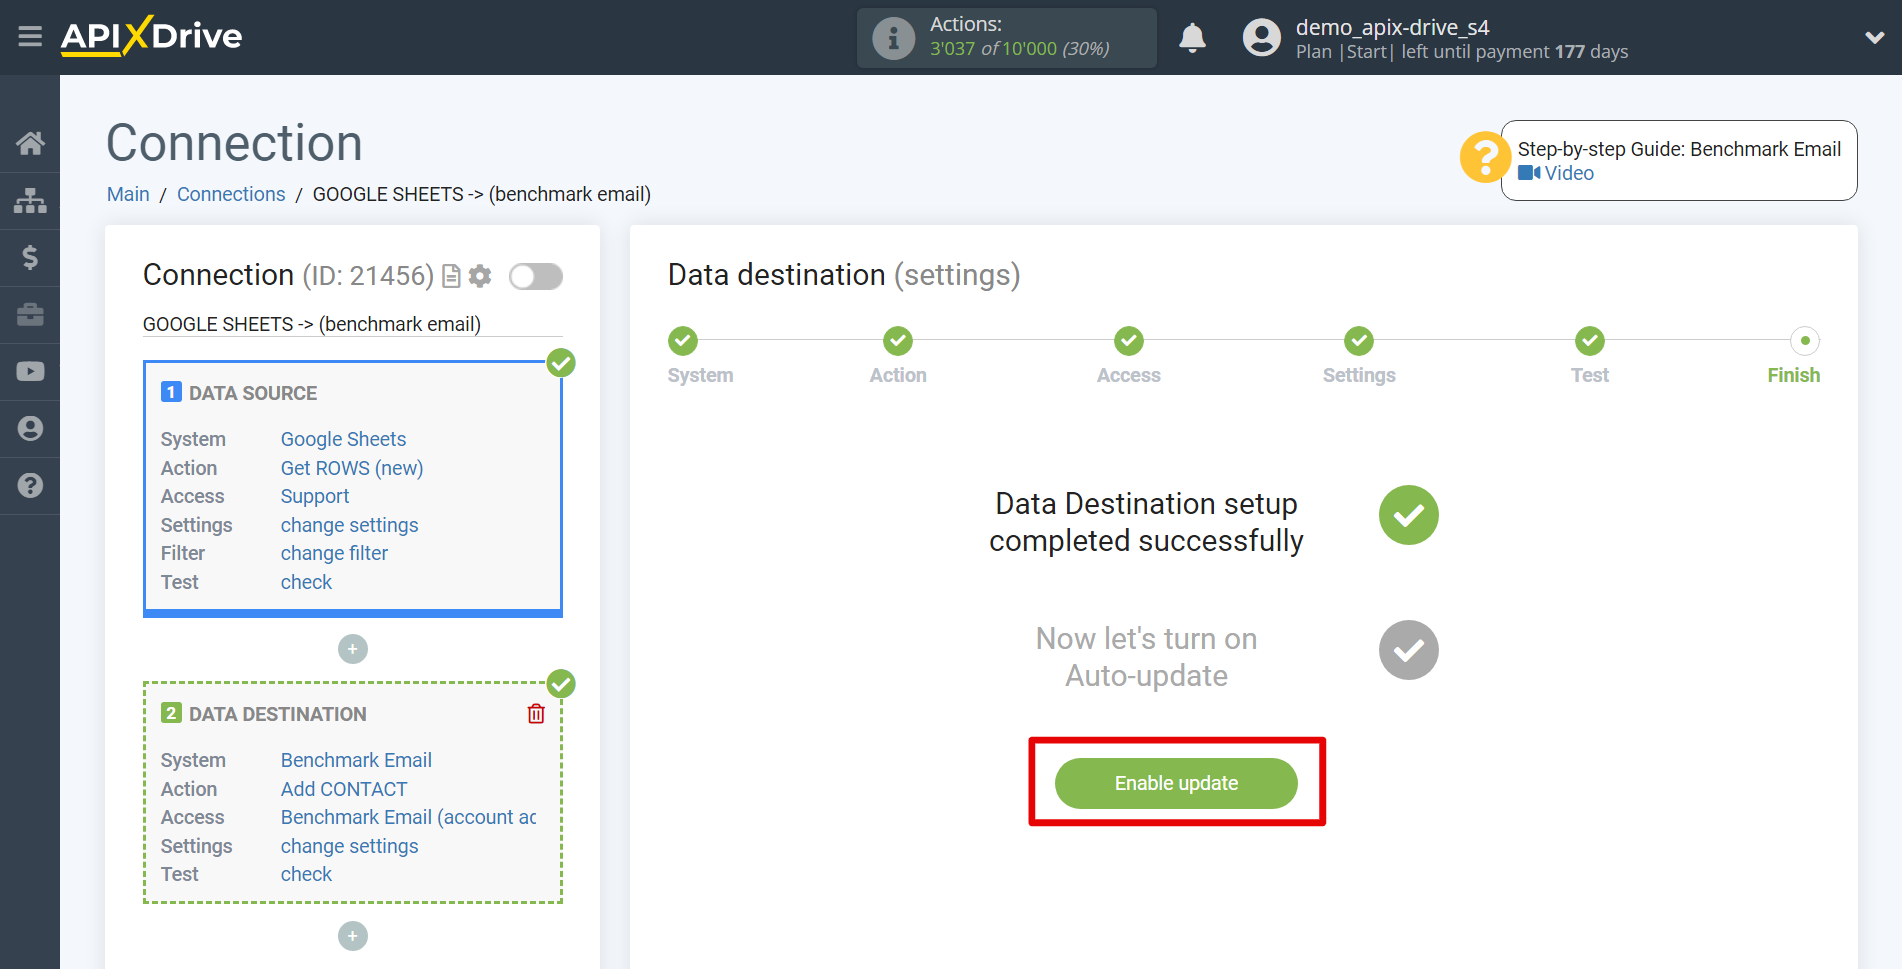 How to Connect Benchmarkemail as Data Destination | Enable auto-update